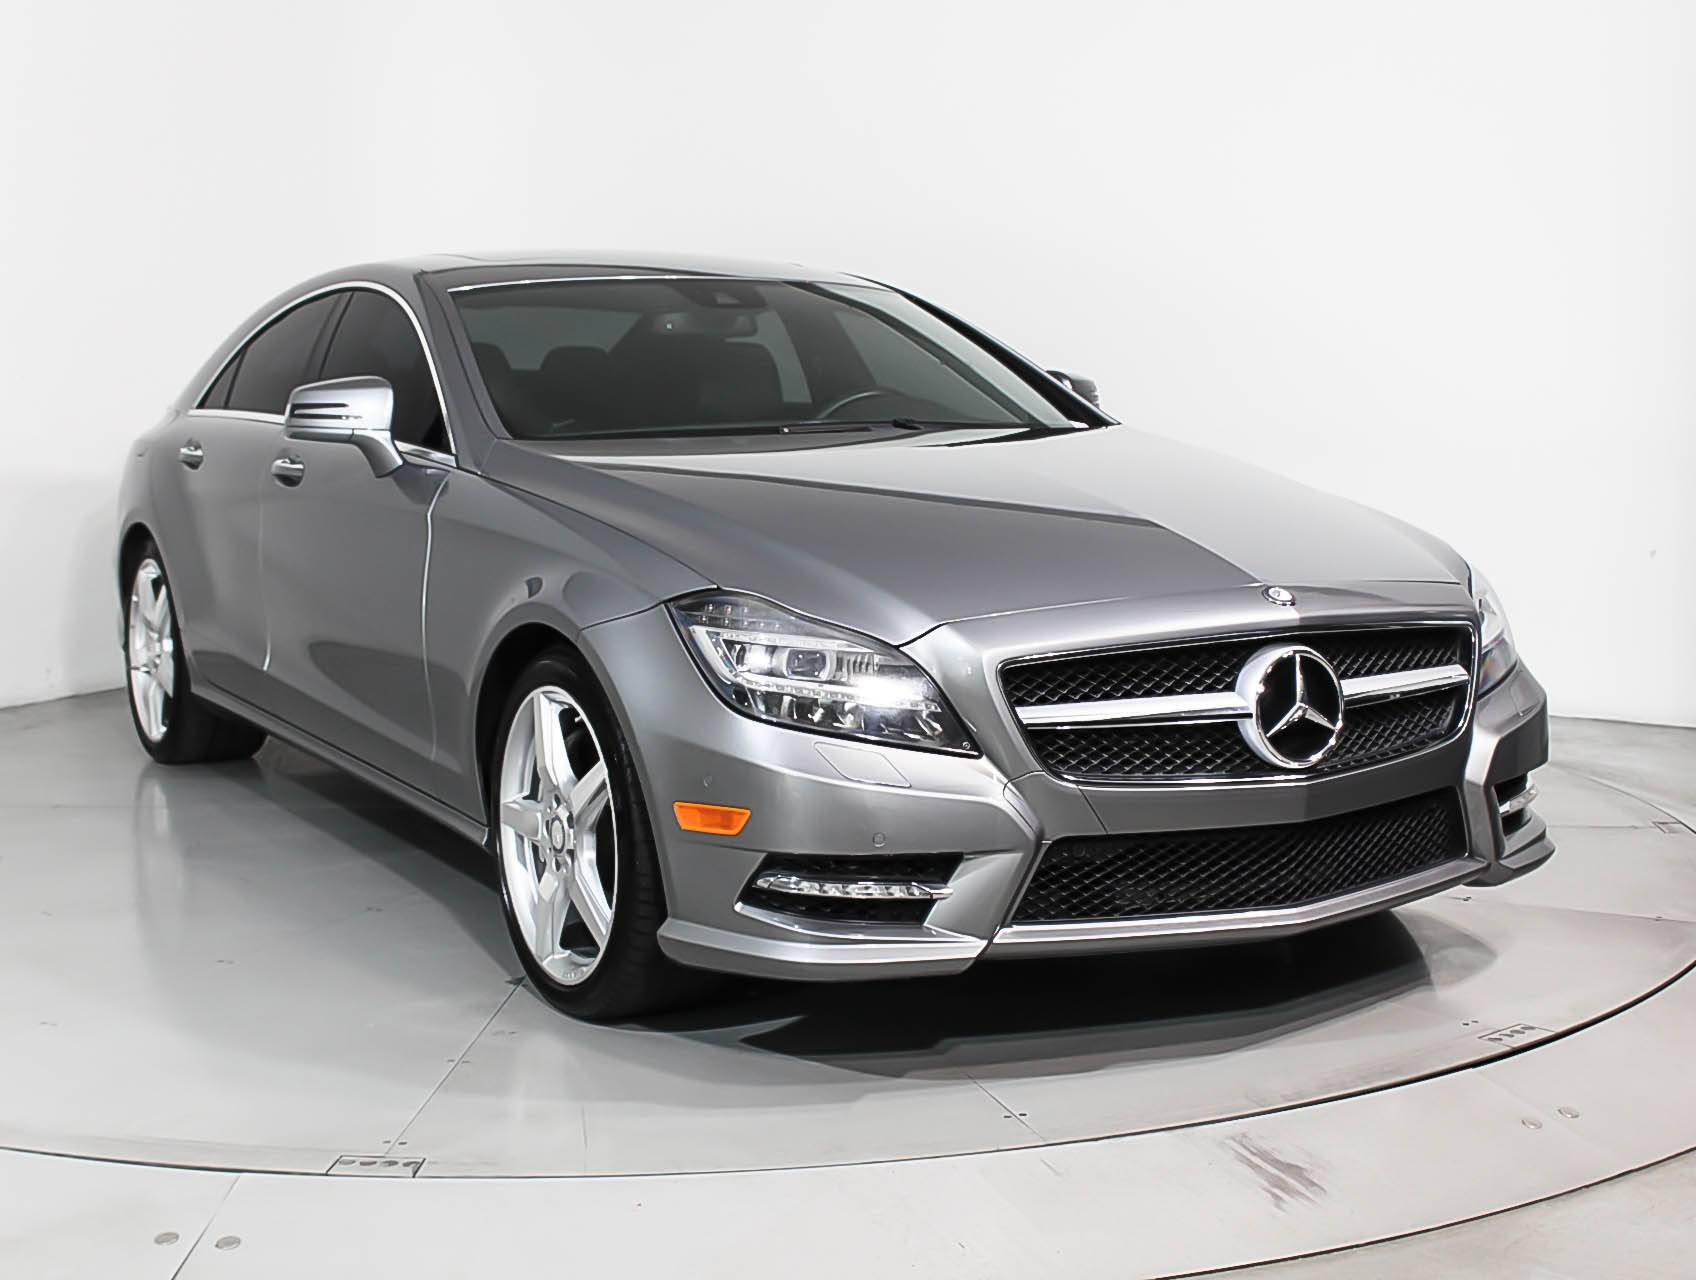 Used 2014 MERCEDES-BENZ CLS CLASS CLS550 for sale in HOLLYWOOD | 97447